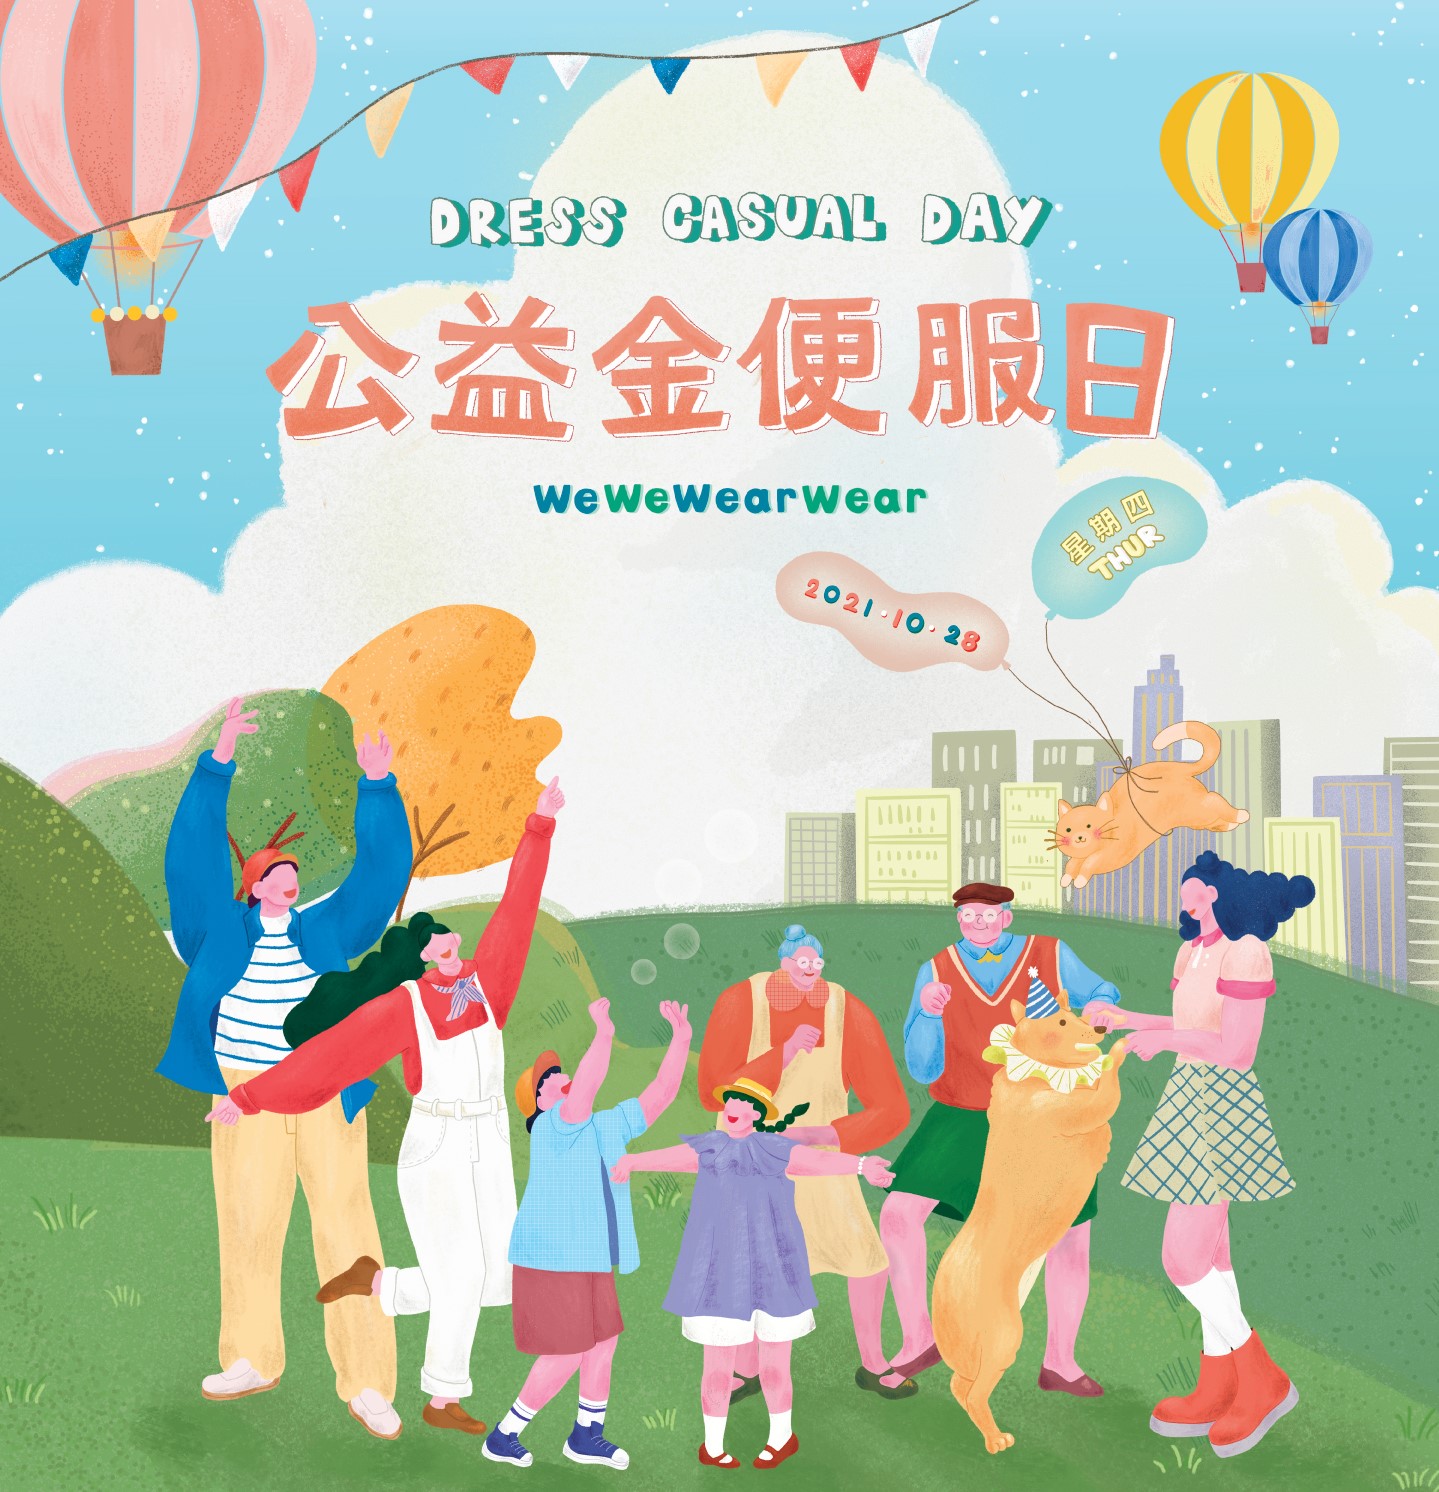 2021 COMMUNITY CHEST DRESS CASUAL DAY SPREADS POSITIVITY AND HAPPINESS |  The Community Chest of Hong Kong